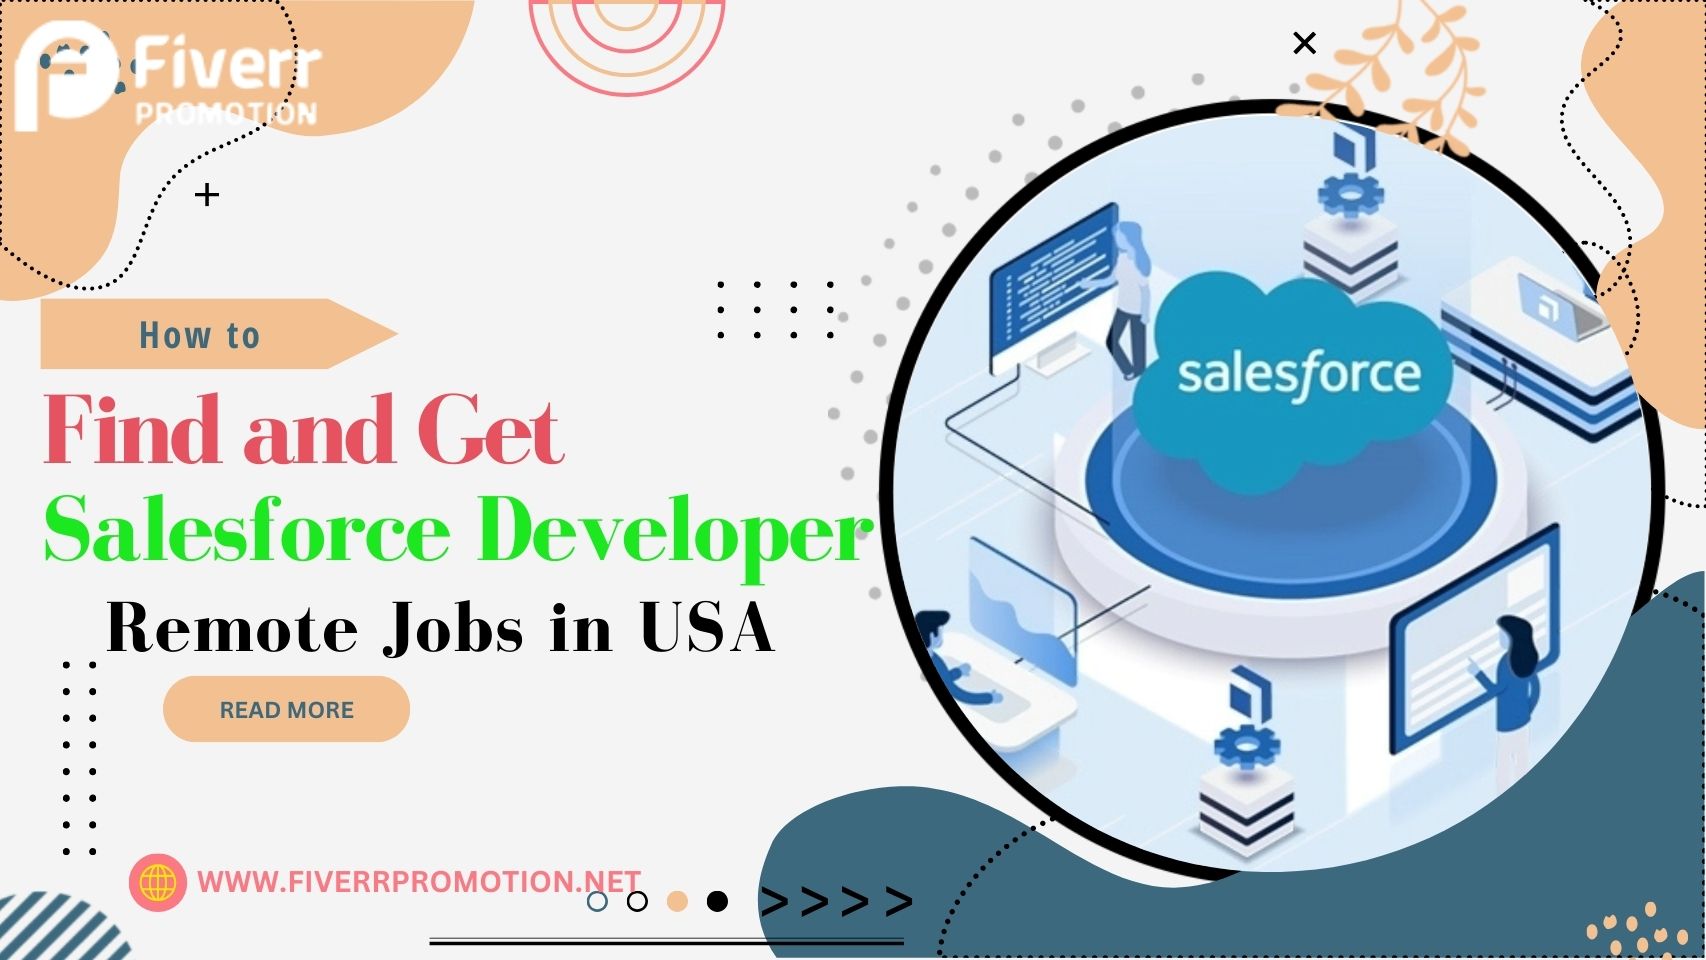 How to Find and Get Salesforce Developer Remote Jobs in USA